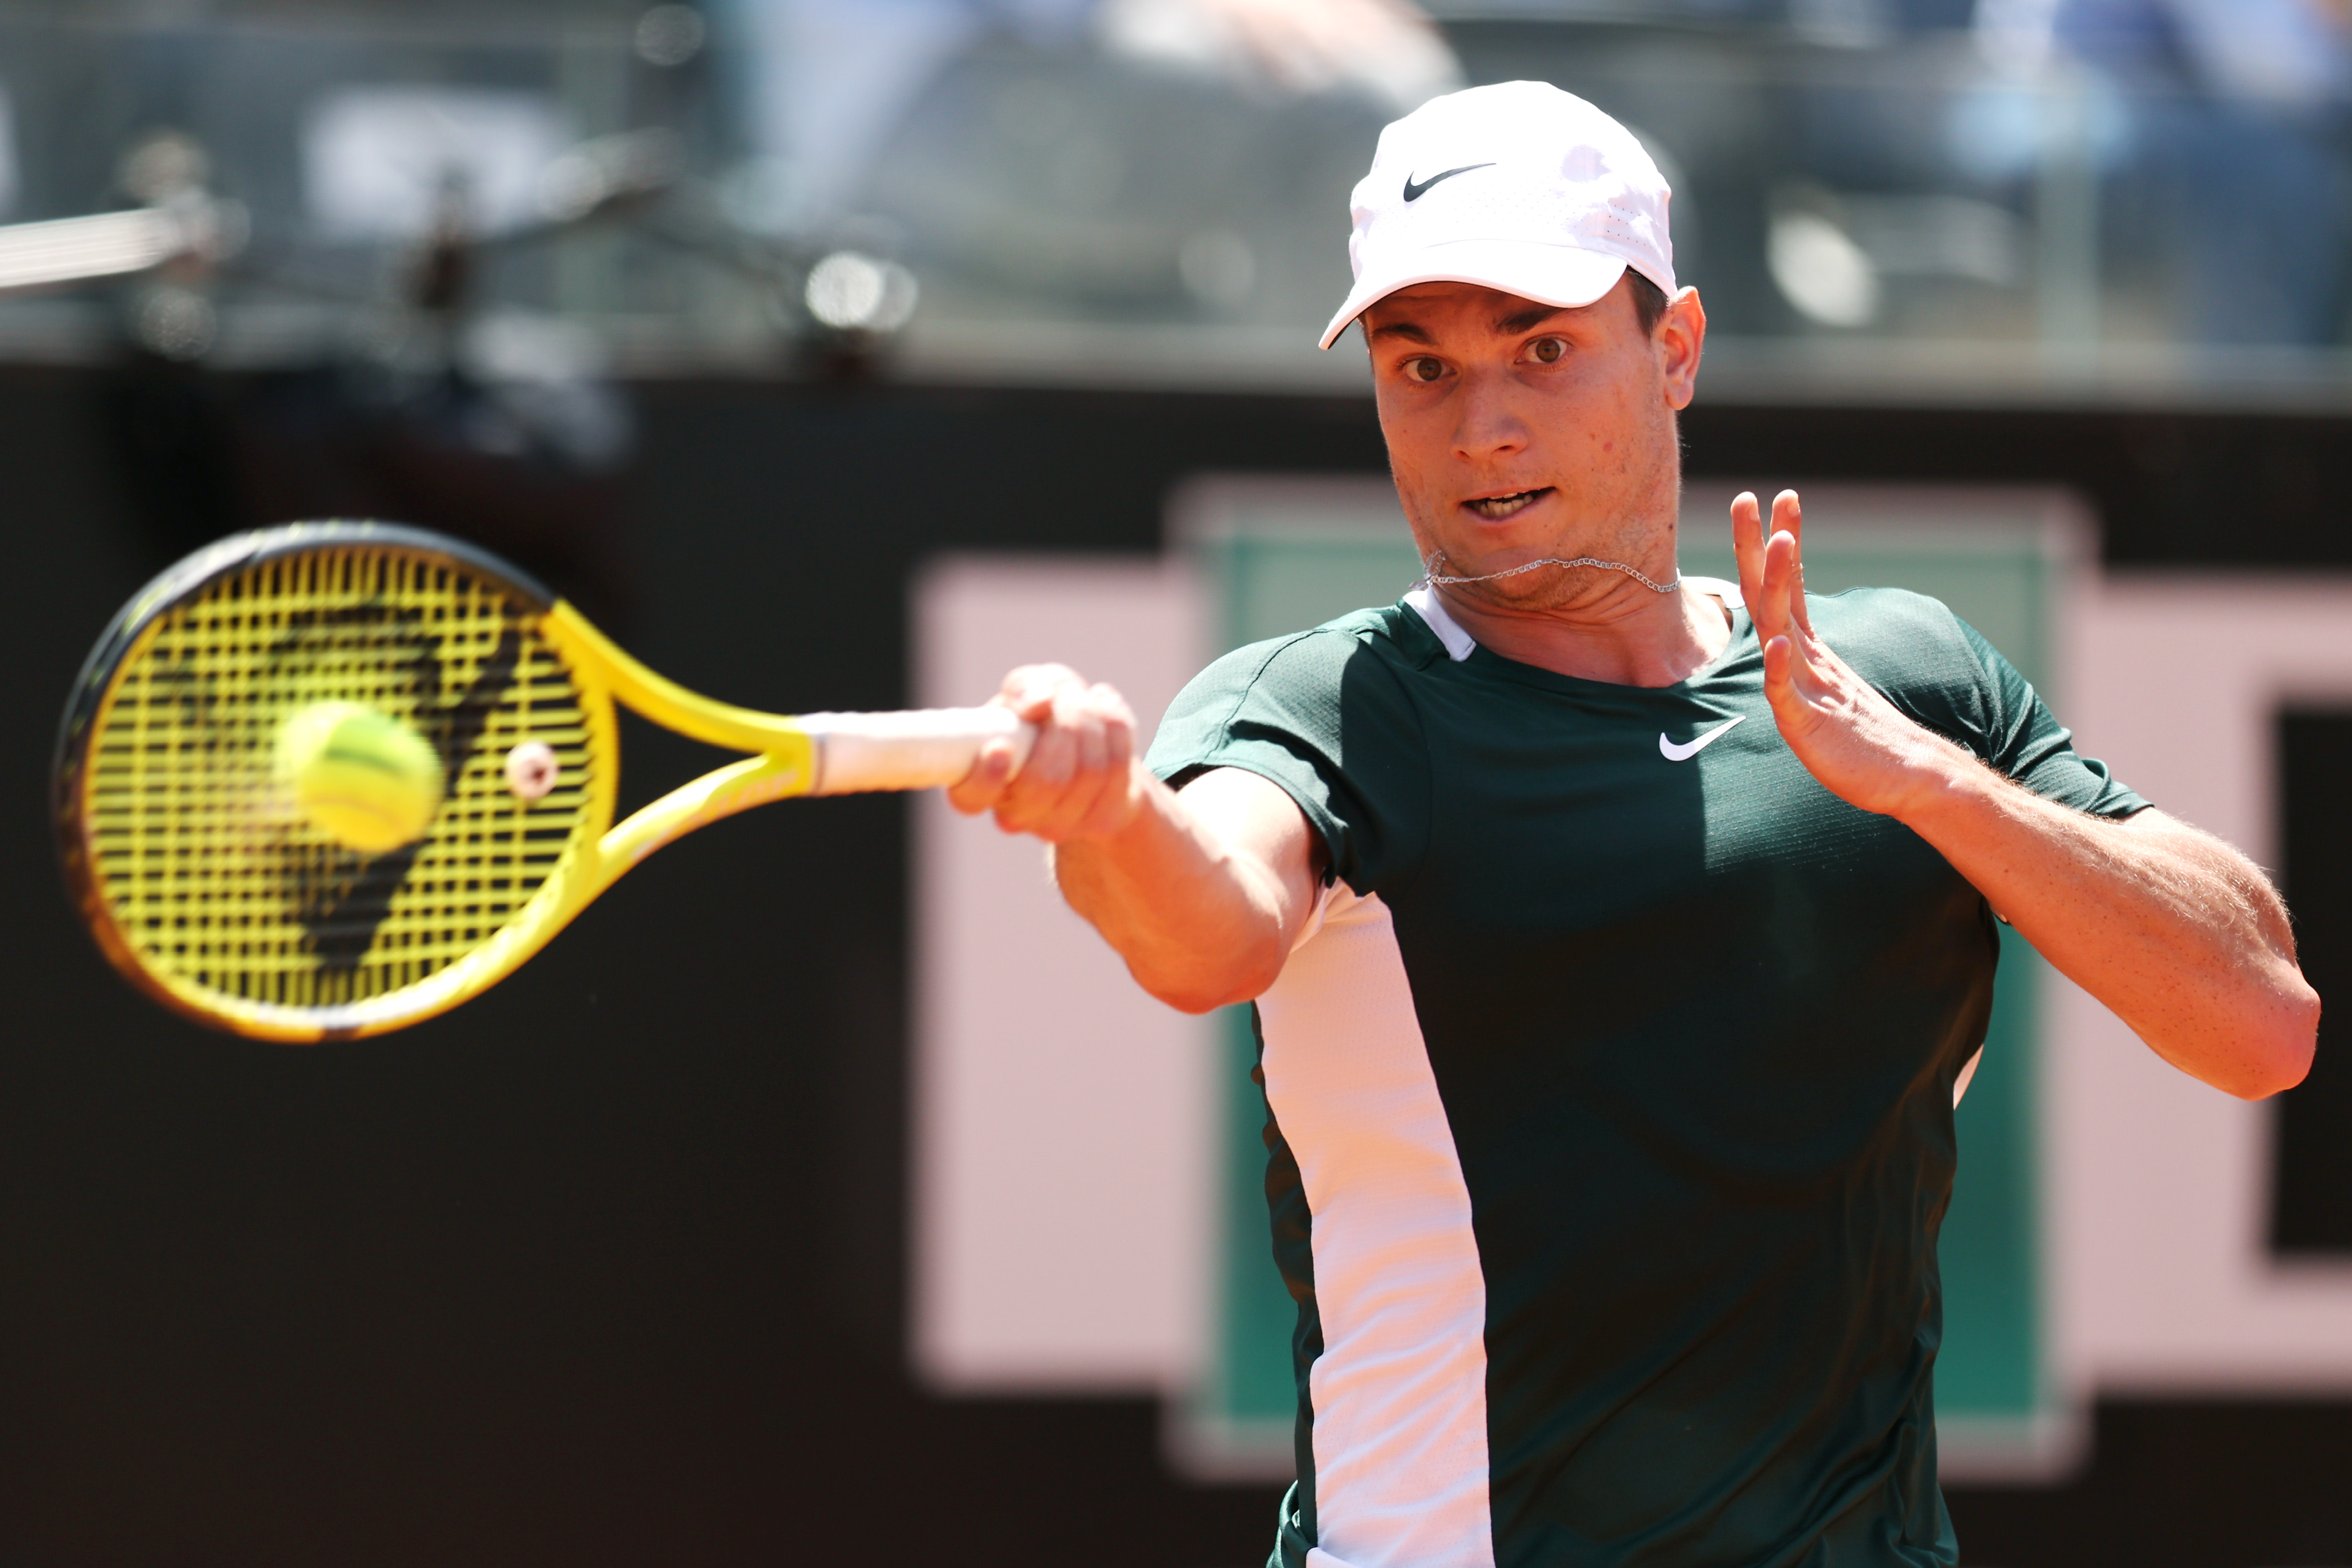 Beginners Guide Miomir Kecmanovic readies for a major moment at Roland Garros